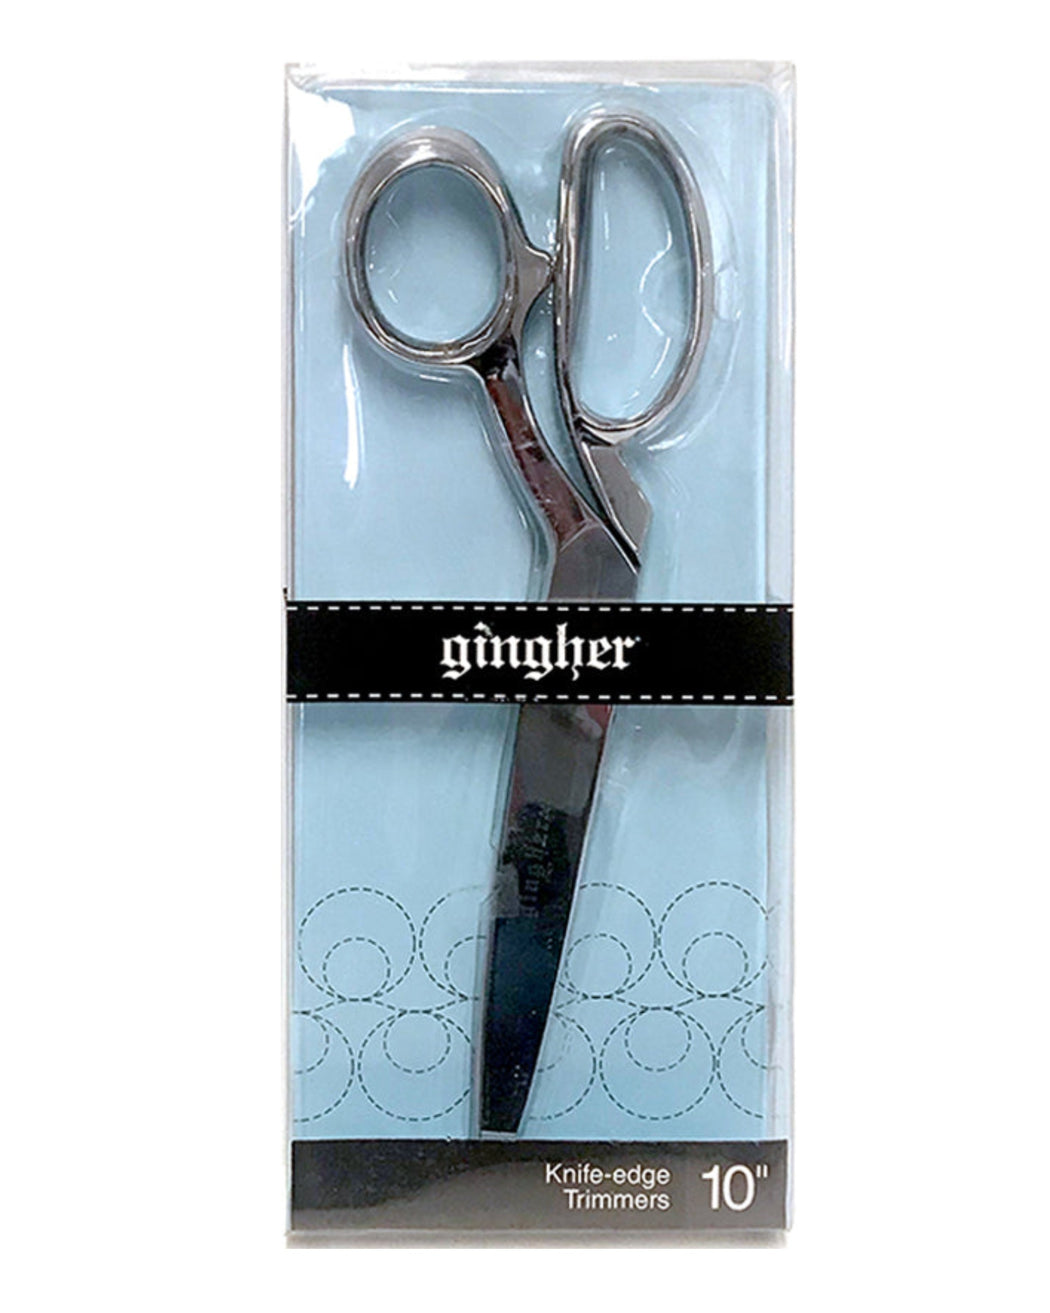 Knife Edge Trimmers 10" - Zipper and Thread